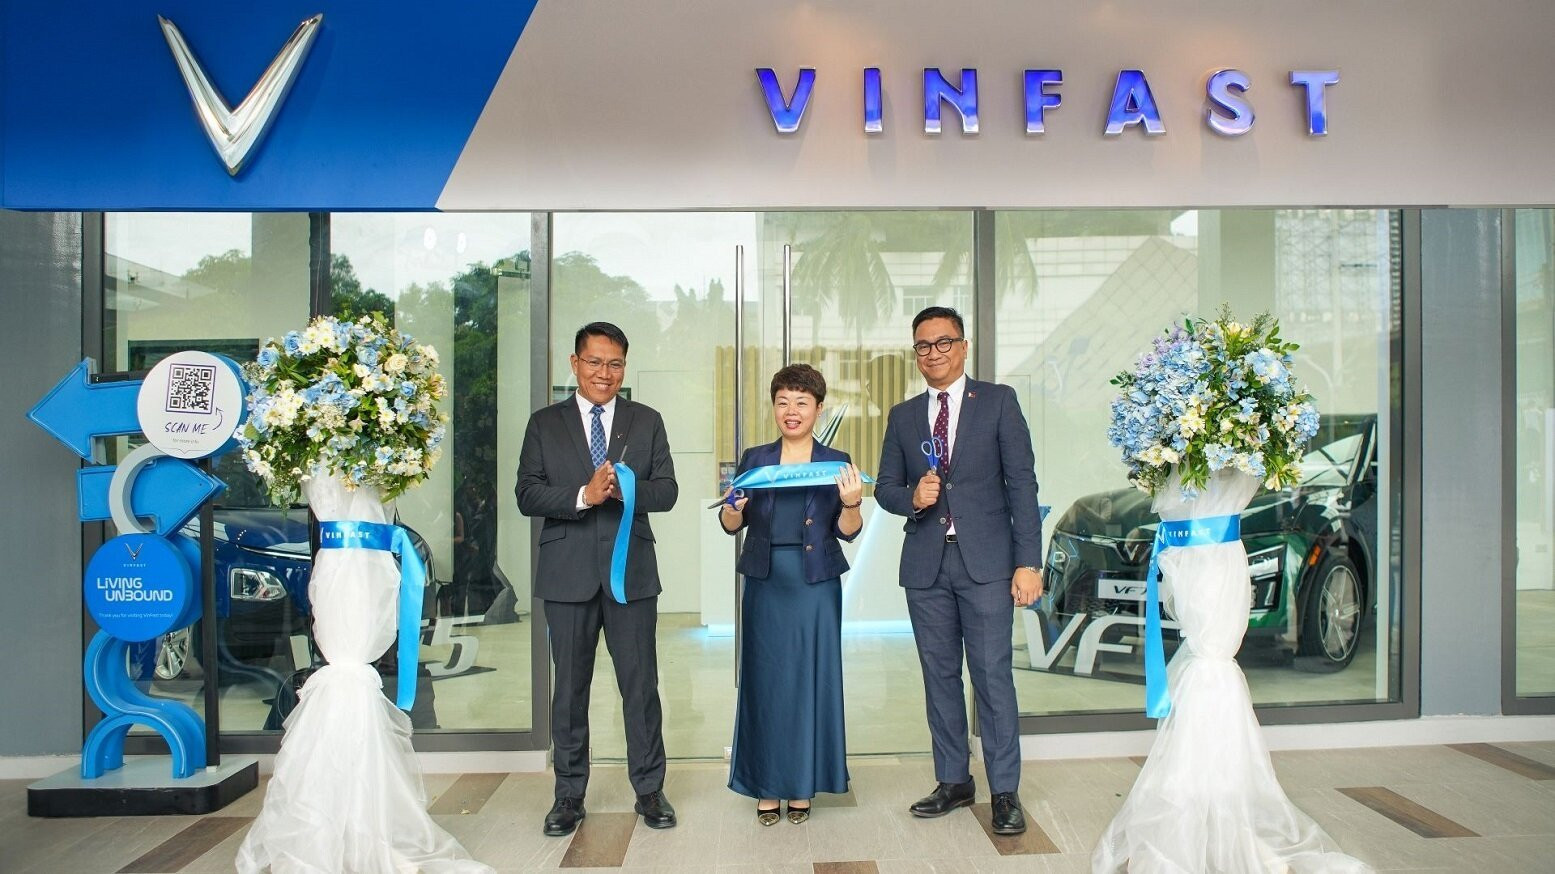 VinFast Opens First 3 Dealer Showrooms in the Philippines